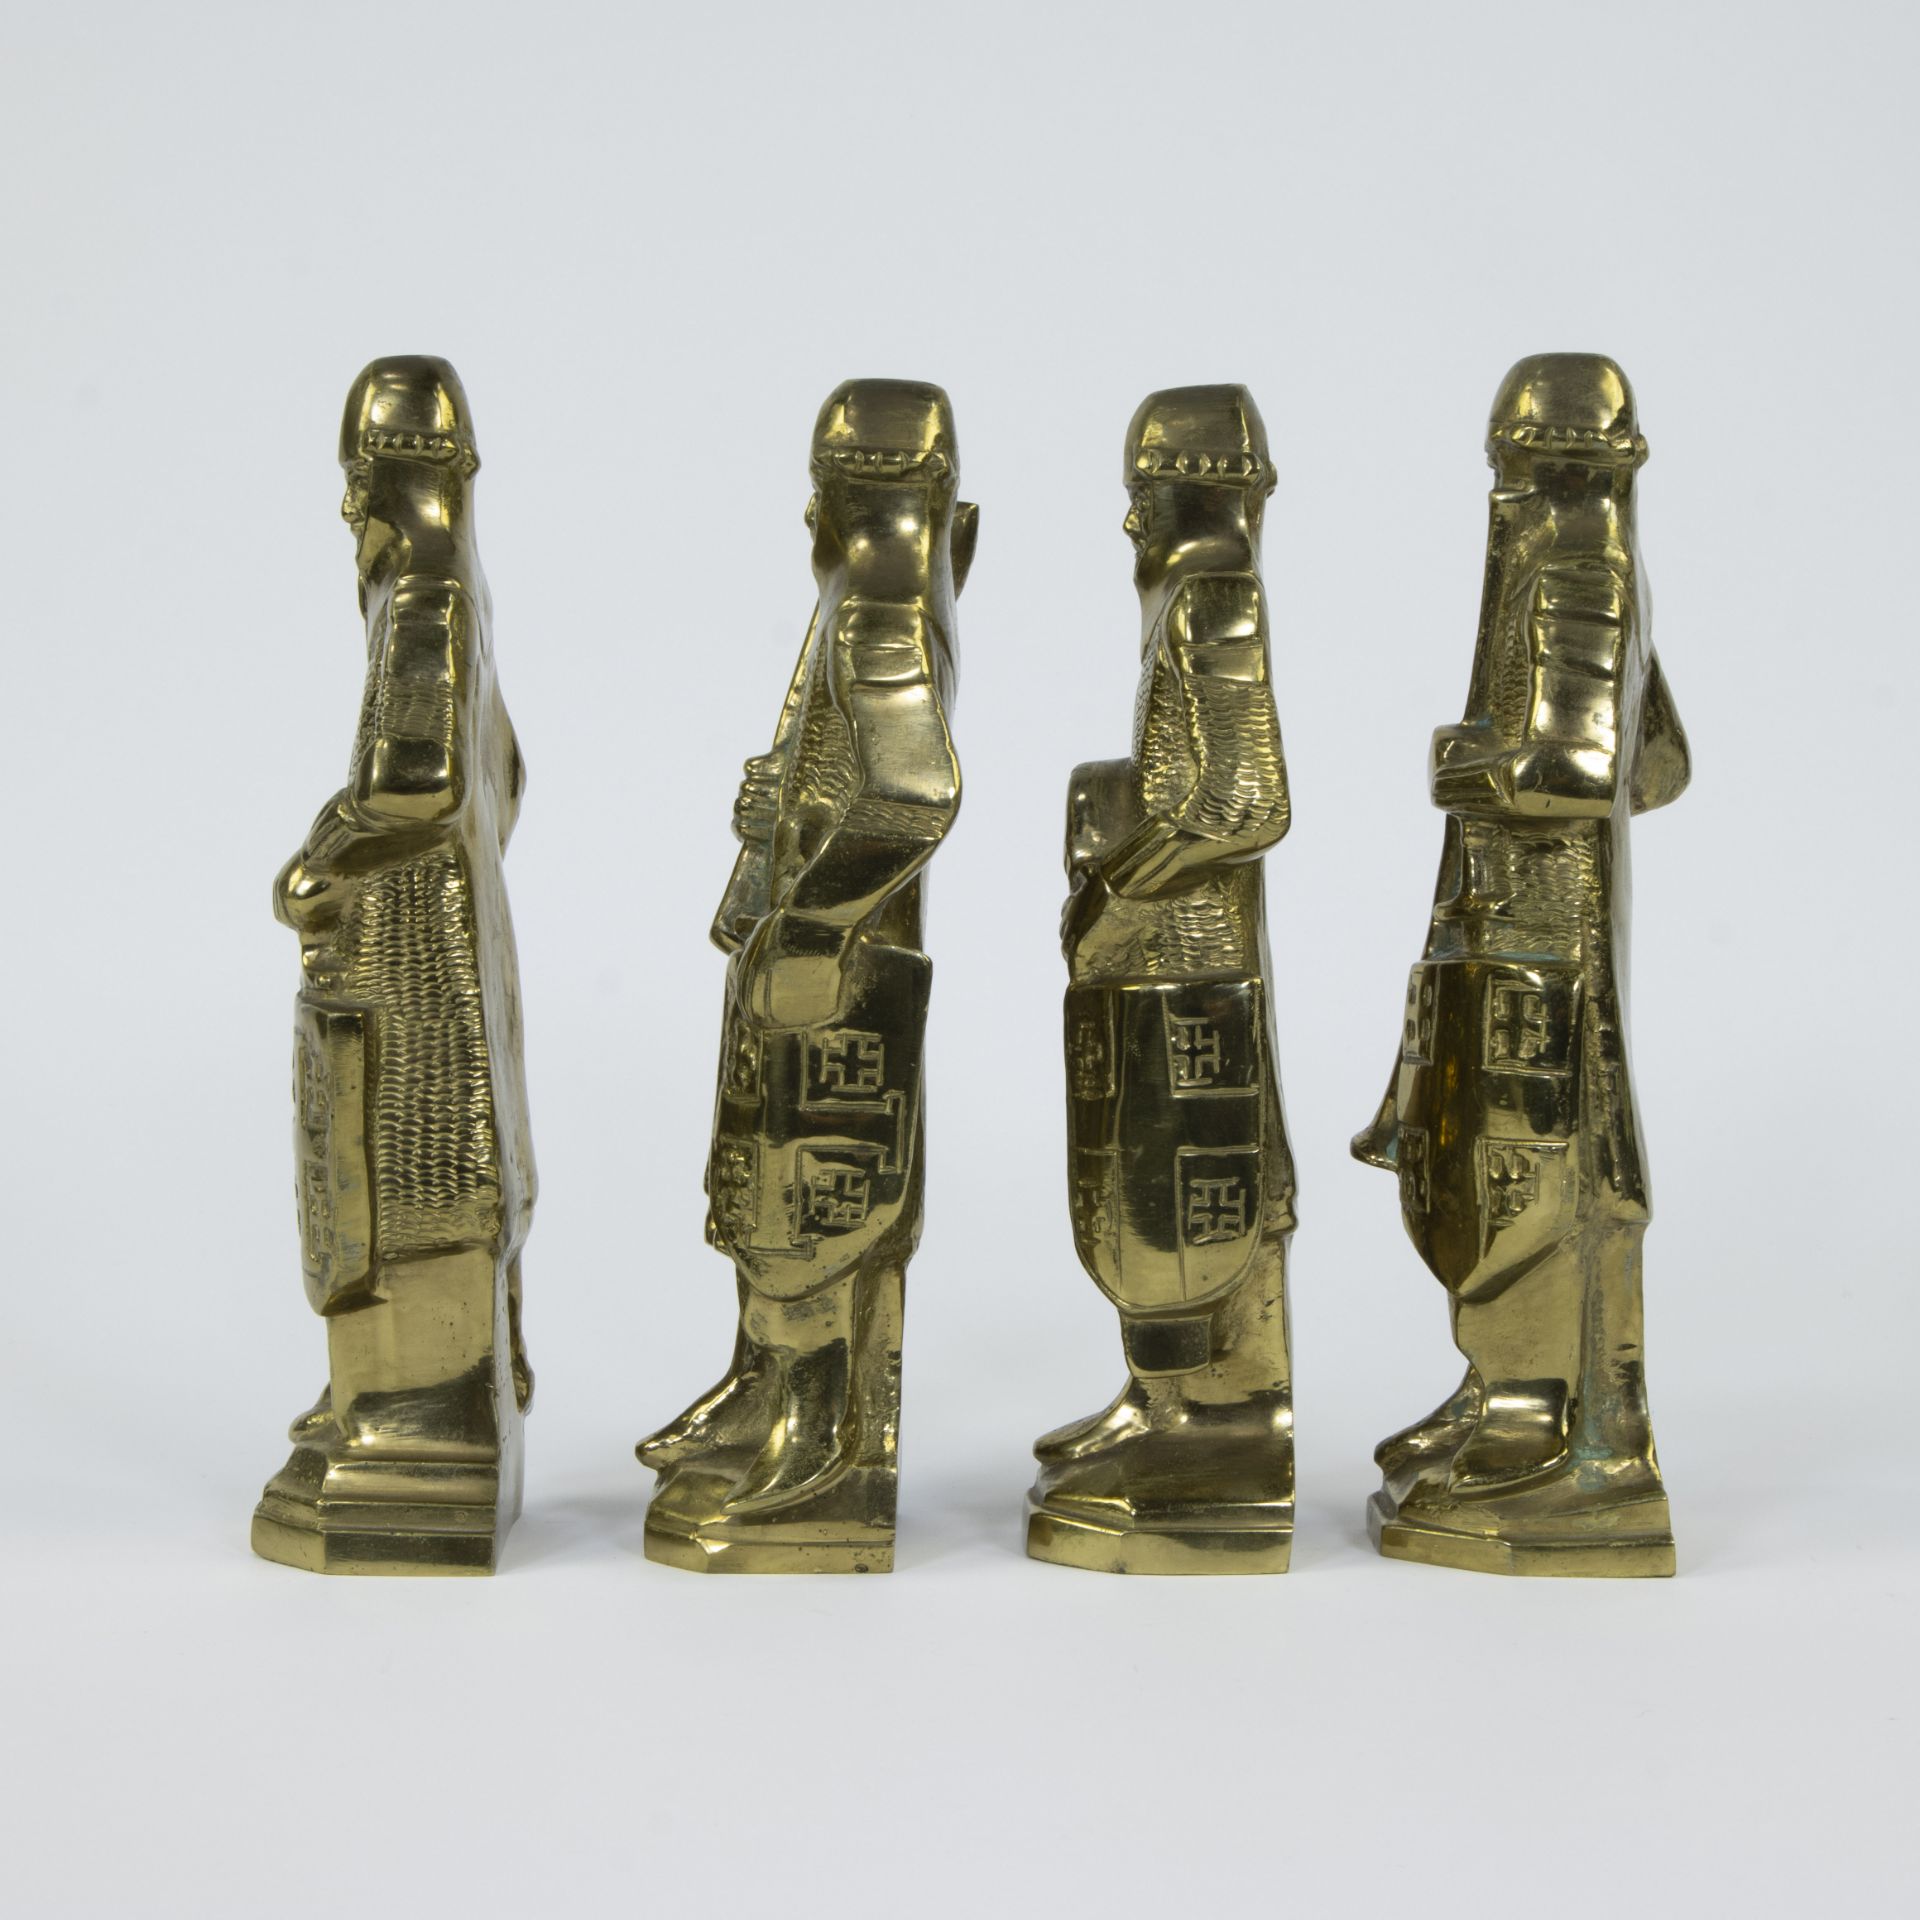 The 4 tower keepers of Ghent in gilt bronze - Image 3 of 4